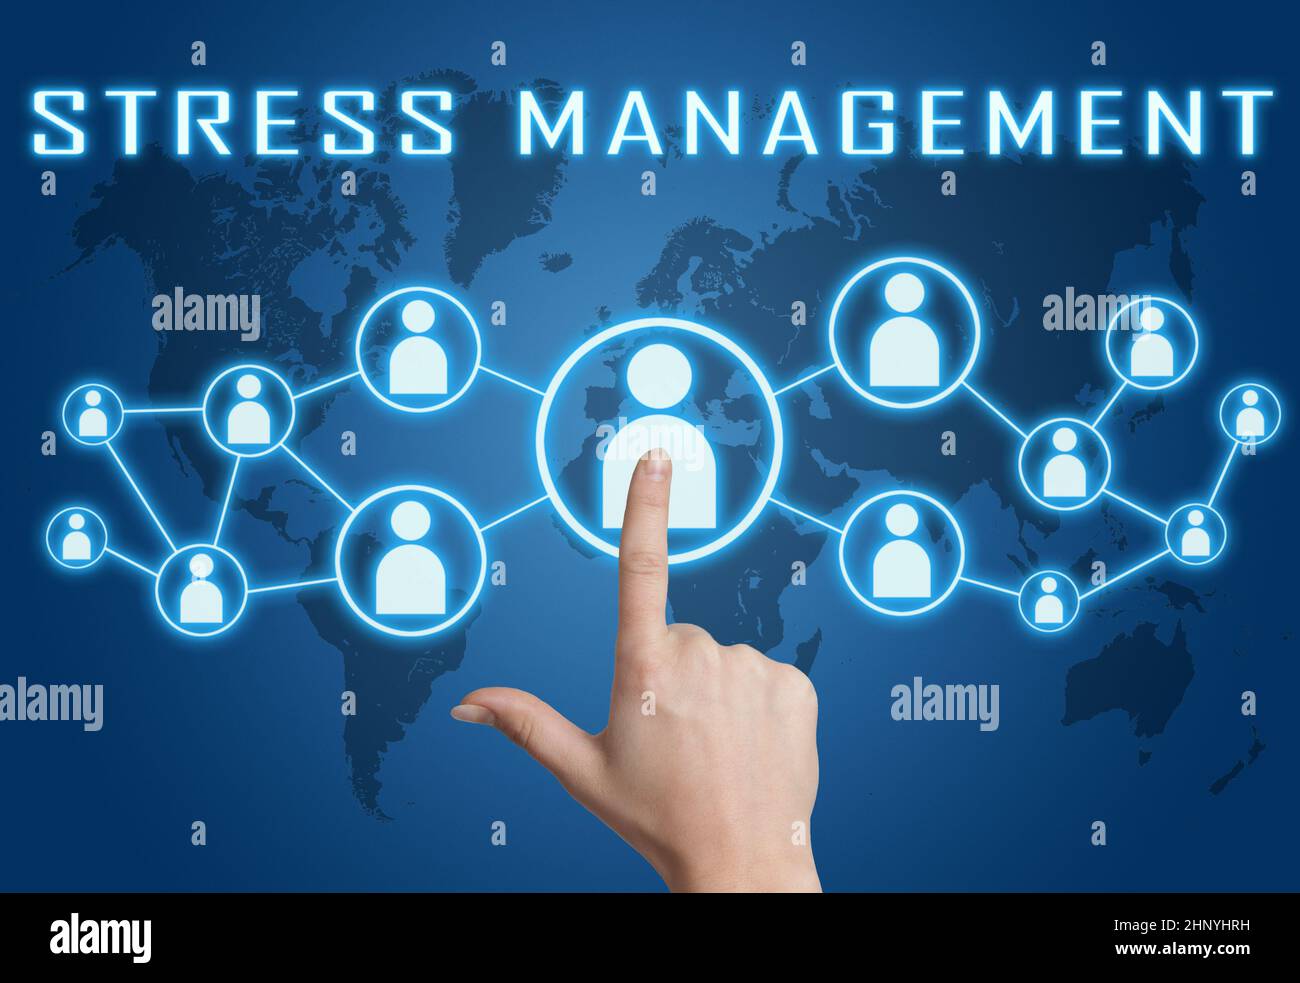 Stress Management - text concept with hand pressing social icons on blue world map background. Stock Photo